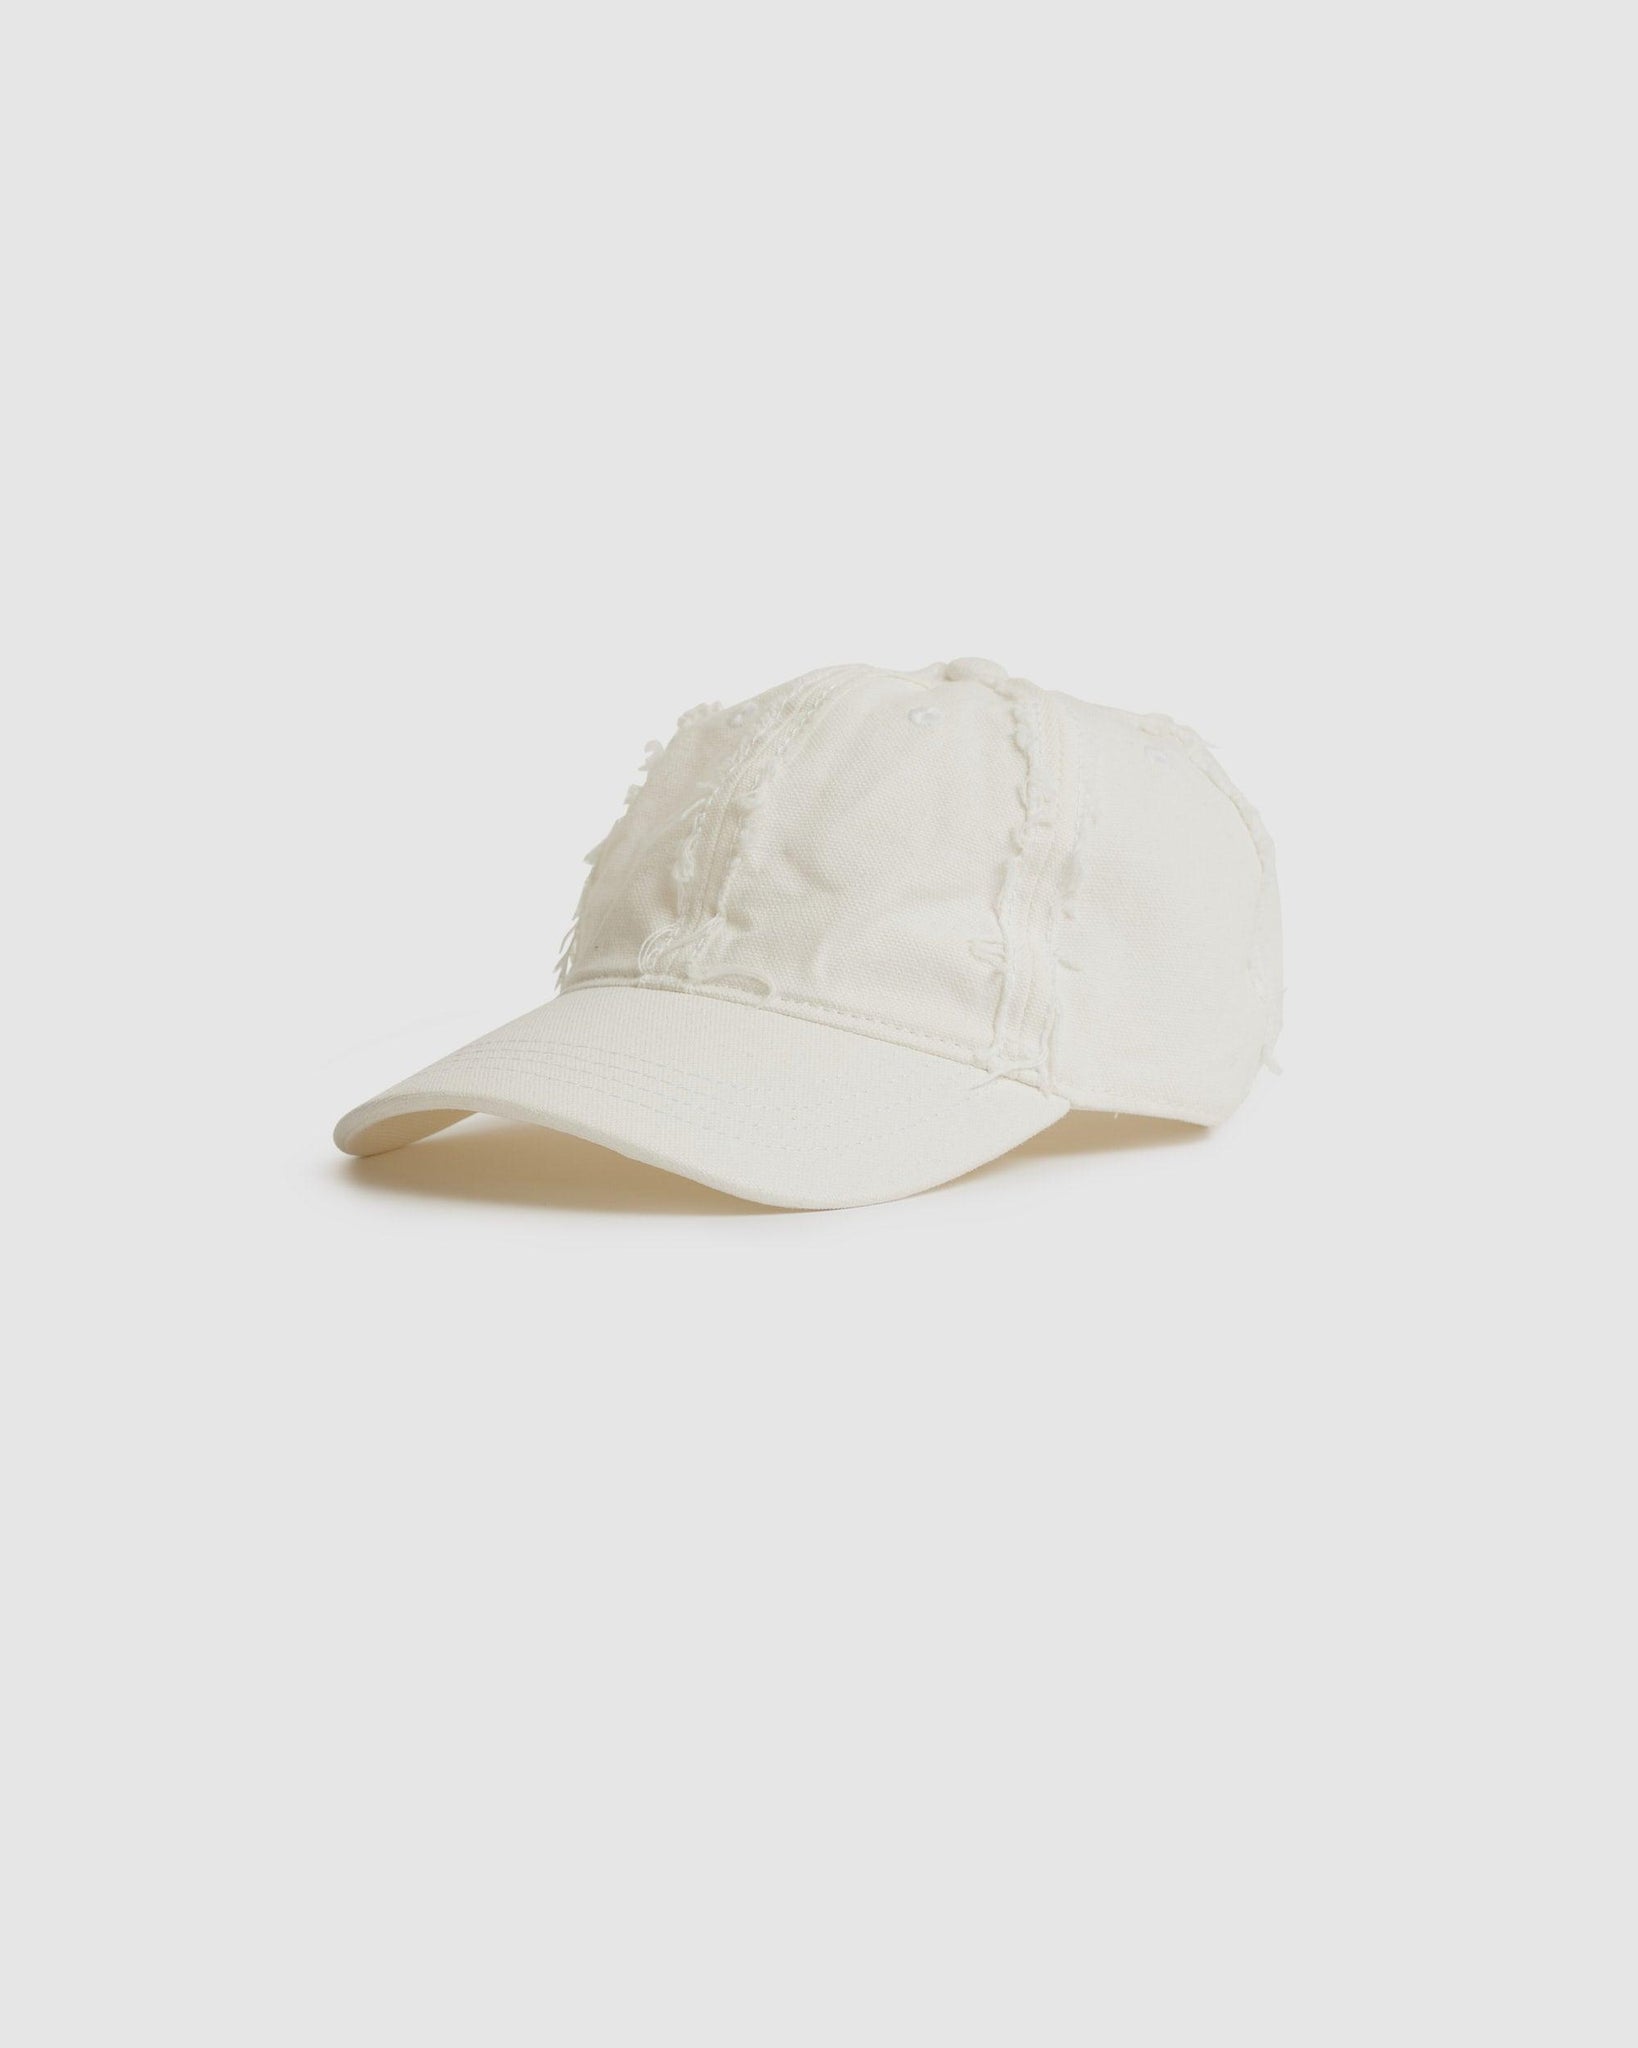 Hat Greige - {{ collection.title }} - Chinatown Country Club 